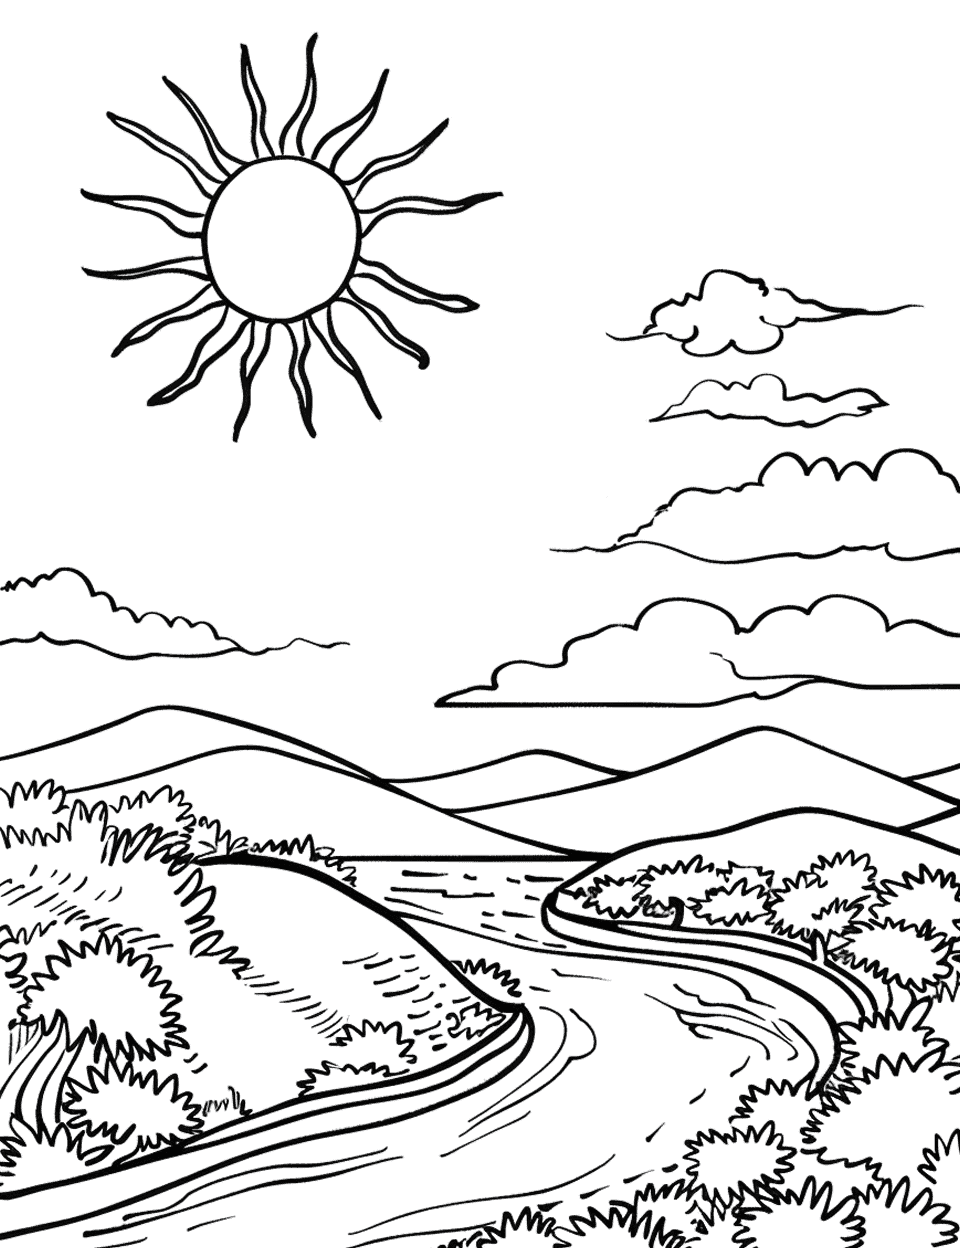 Valley Sunrise Sun Coloring Page - The sun rising over a lush valley, with a river winding through it.